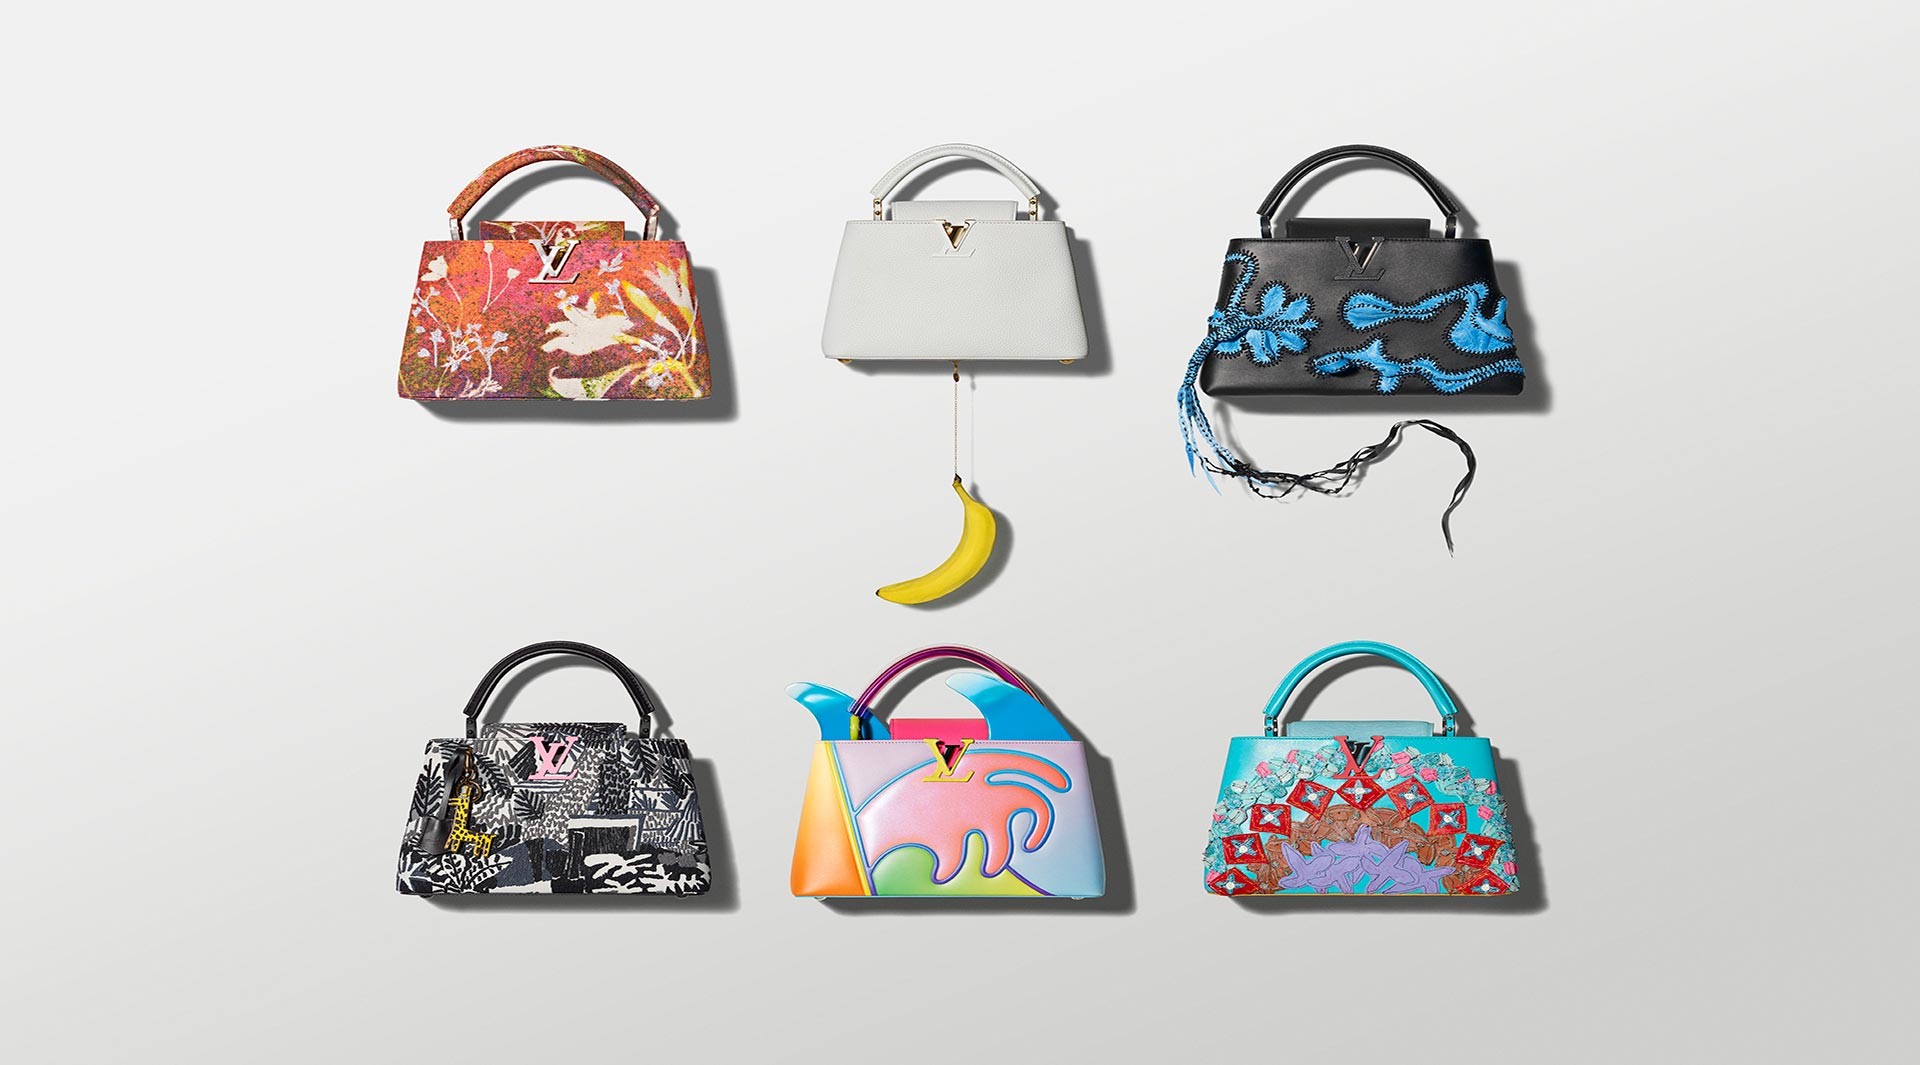 The fourth chapter of Louis Vuitton Artycapucines bag collection is here